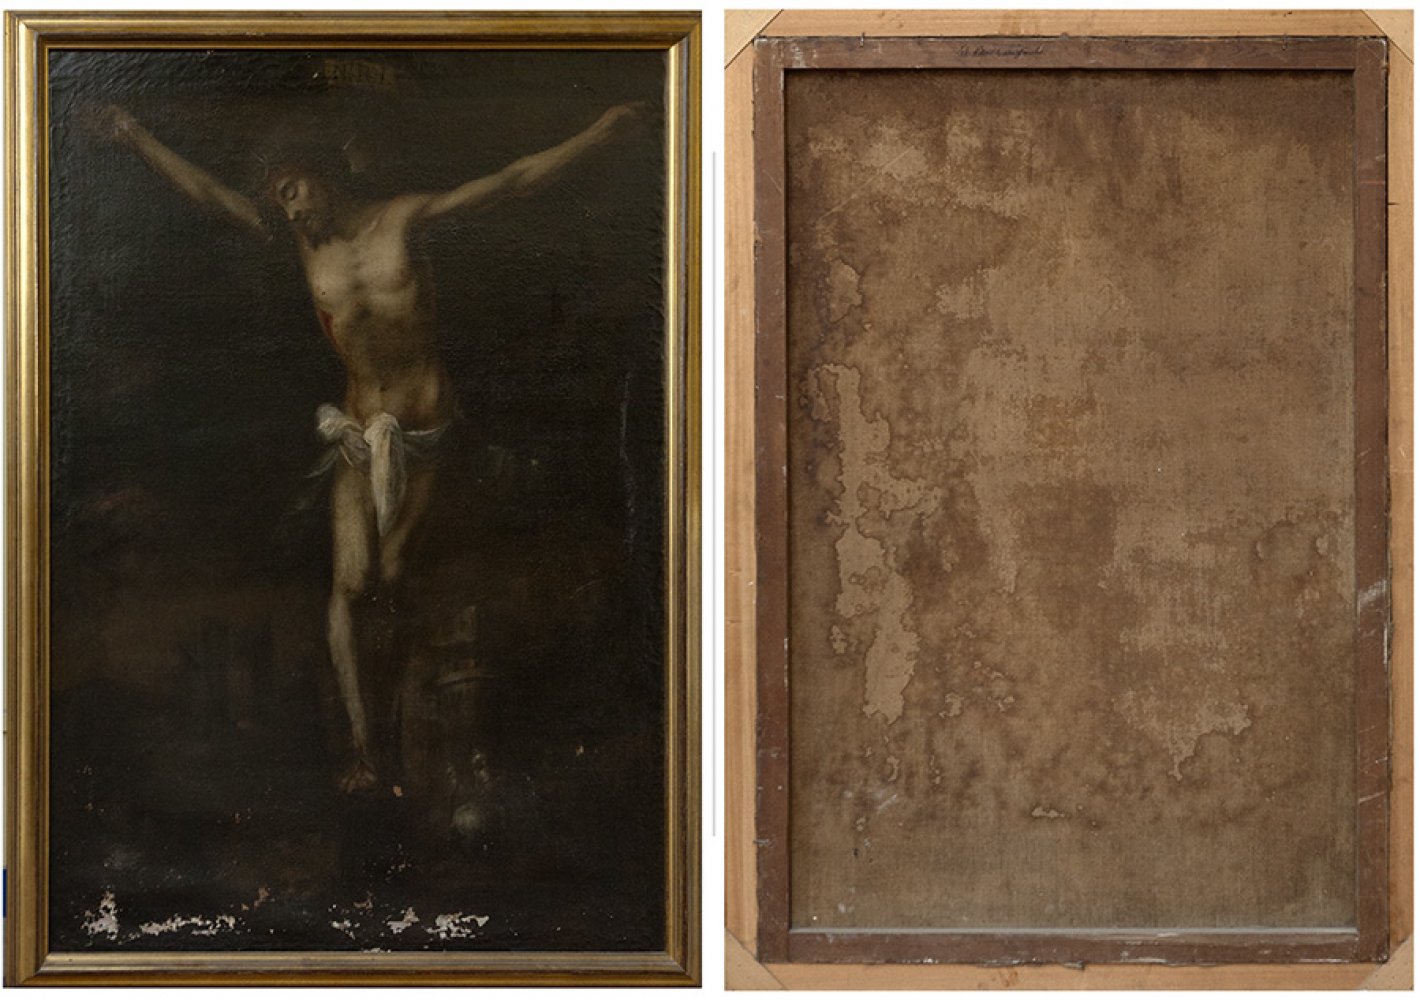 Andalusian school of the 18th century."The Crucified Lord".Oil on canvas.Measurements: 154 x 105 cm; - Image 4 of 7